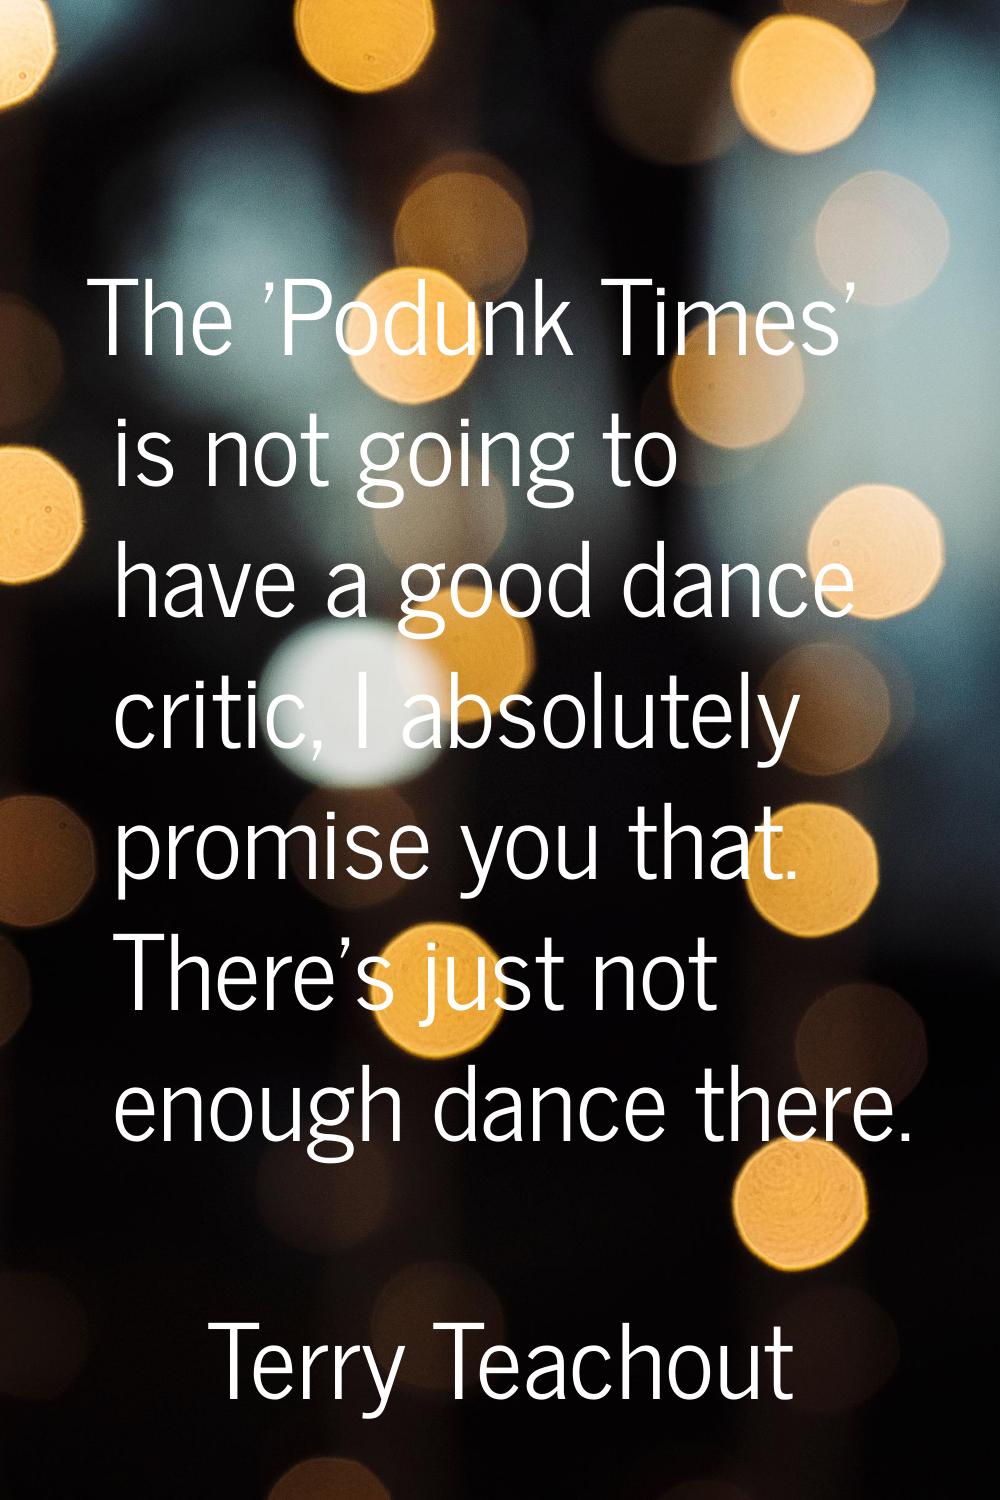 The 'Podunk Times' is not going to have a good dance critic, I absolutely promise you that. There's